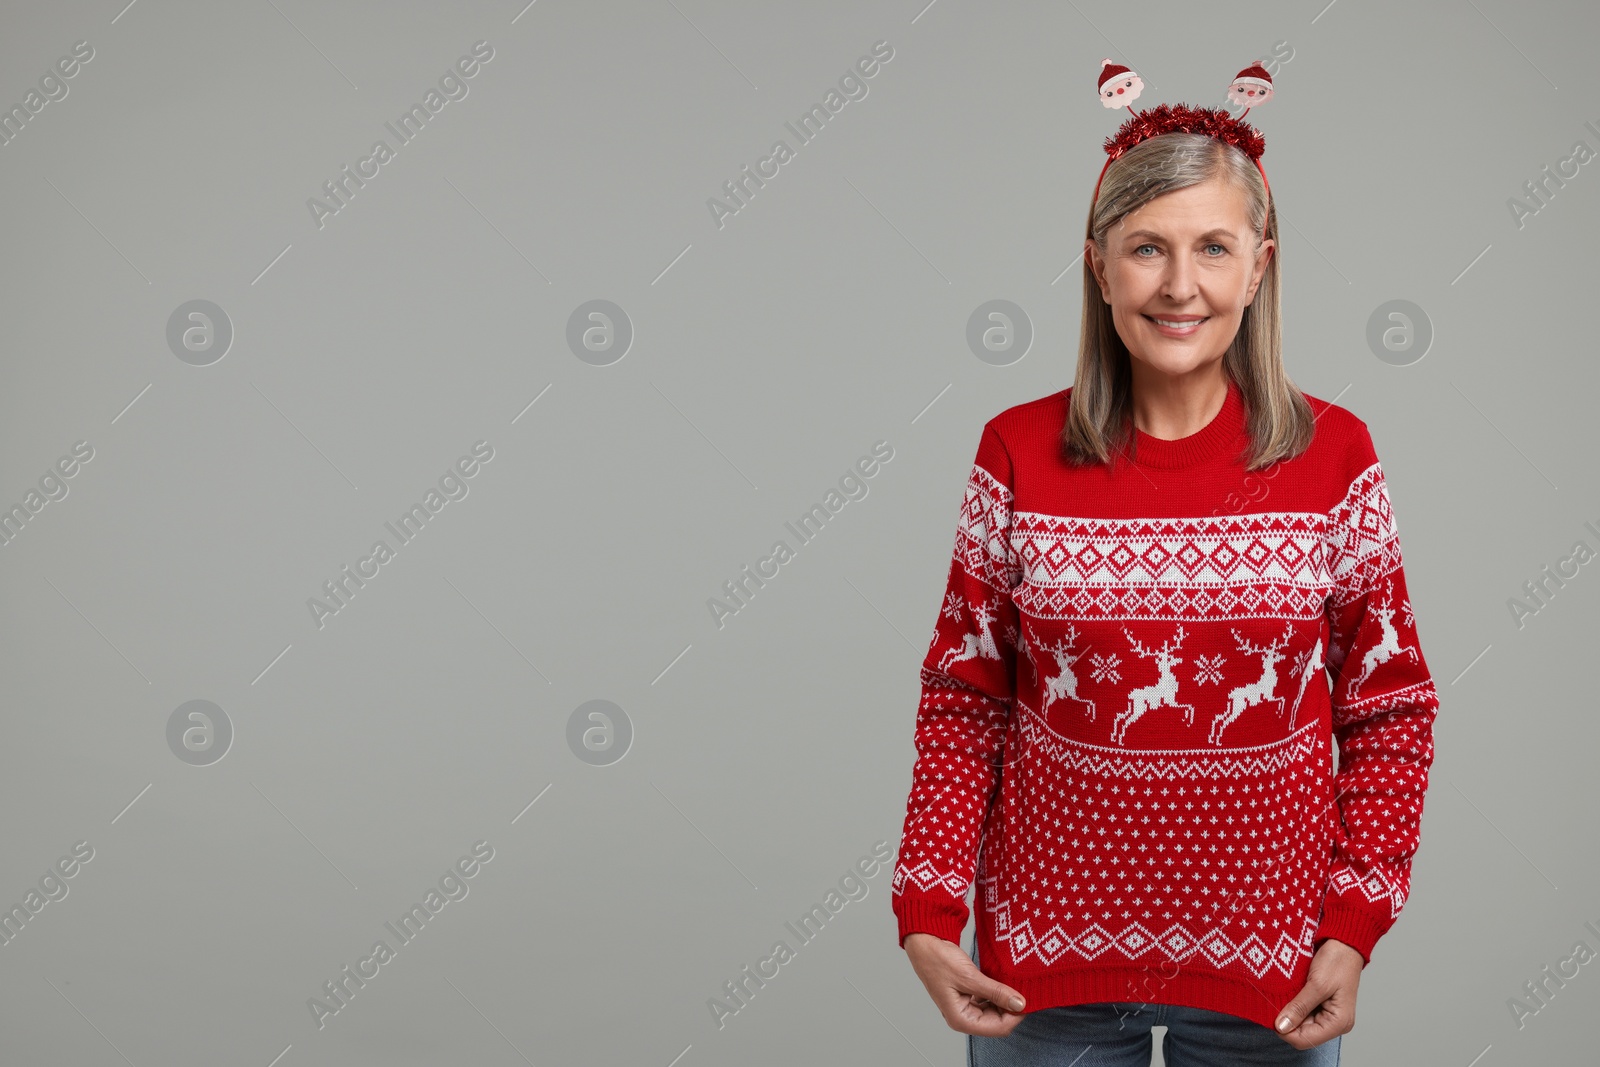 Photo of Happy senior woman in Santa headband showing her Christmas sweater on grey background. Space for text